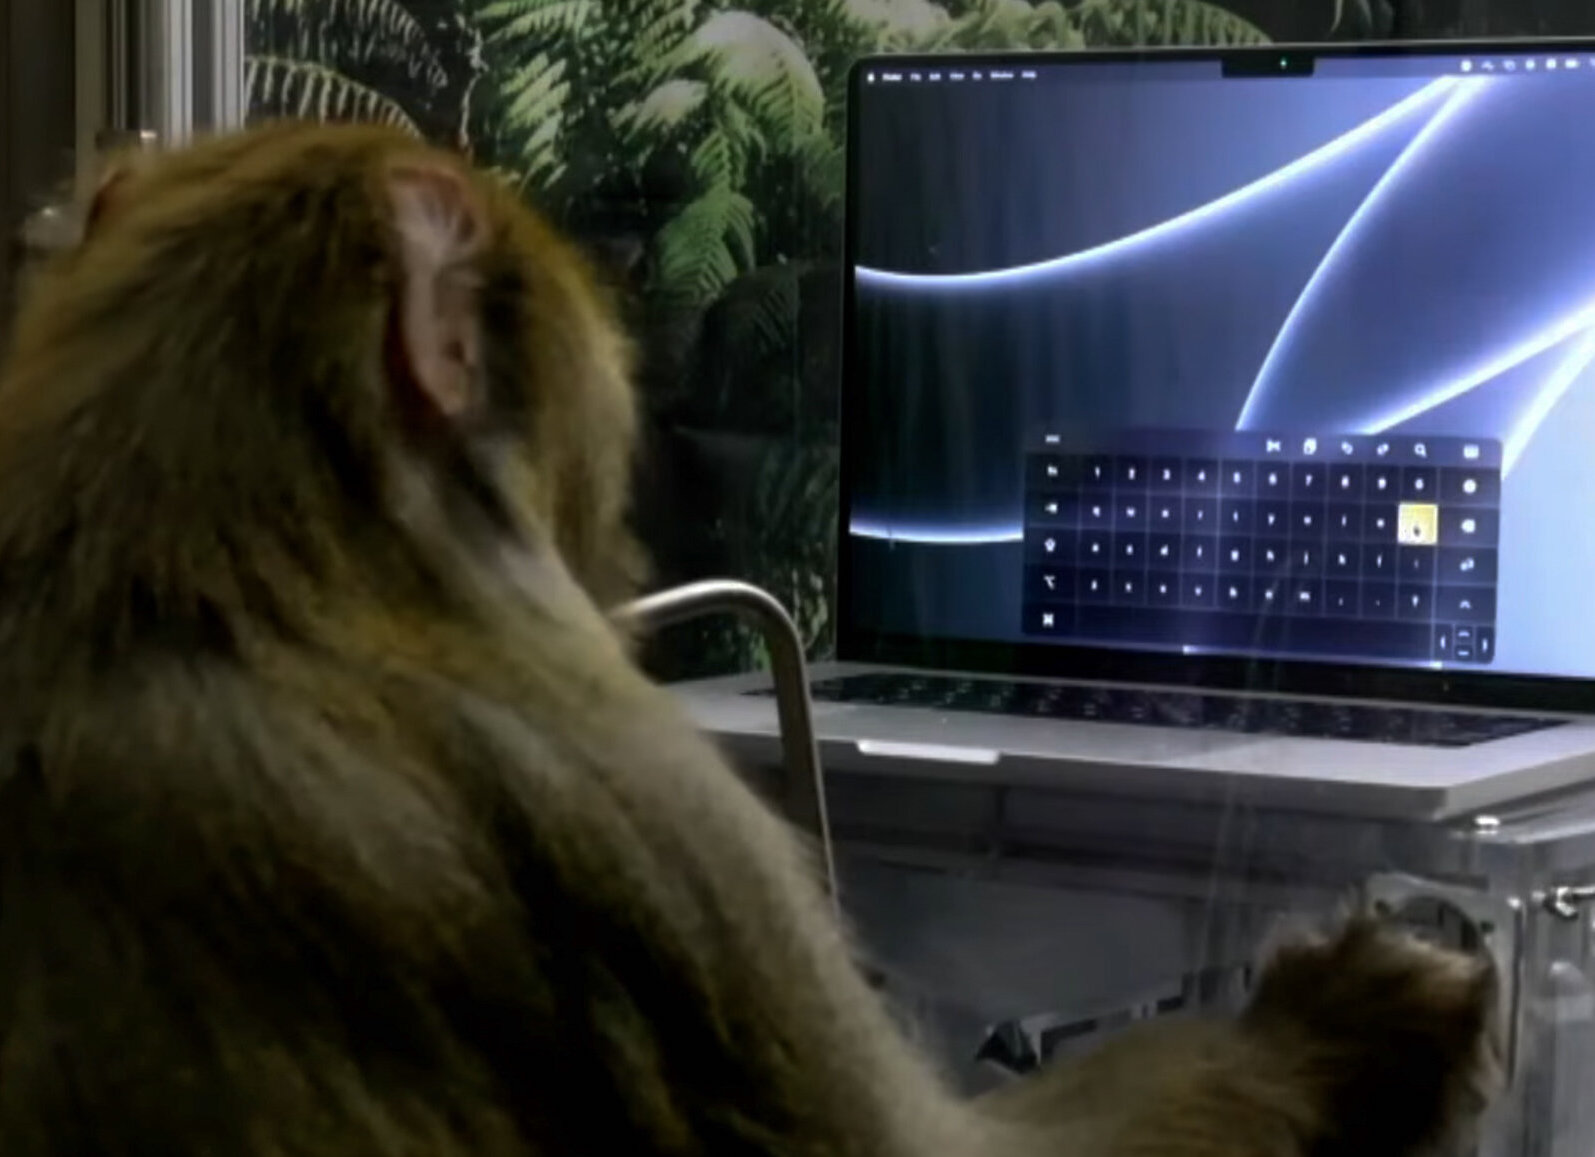 Elon Musk - Neurallink makes a monkey able to type with its mind, but is that a big deal?

